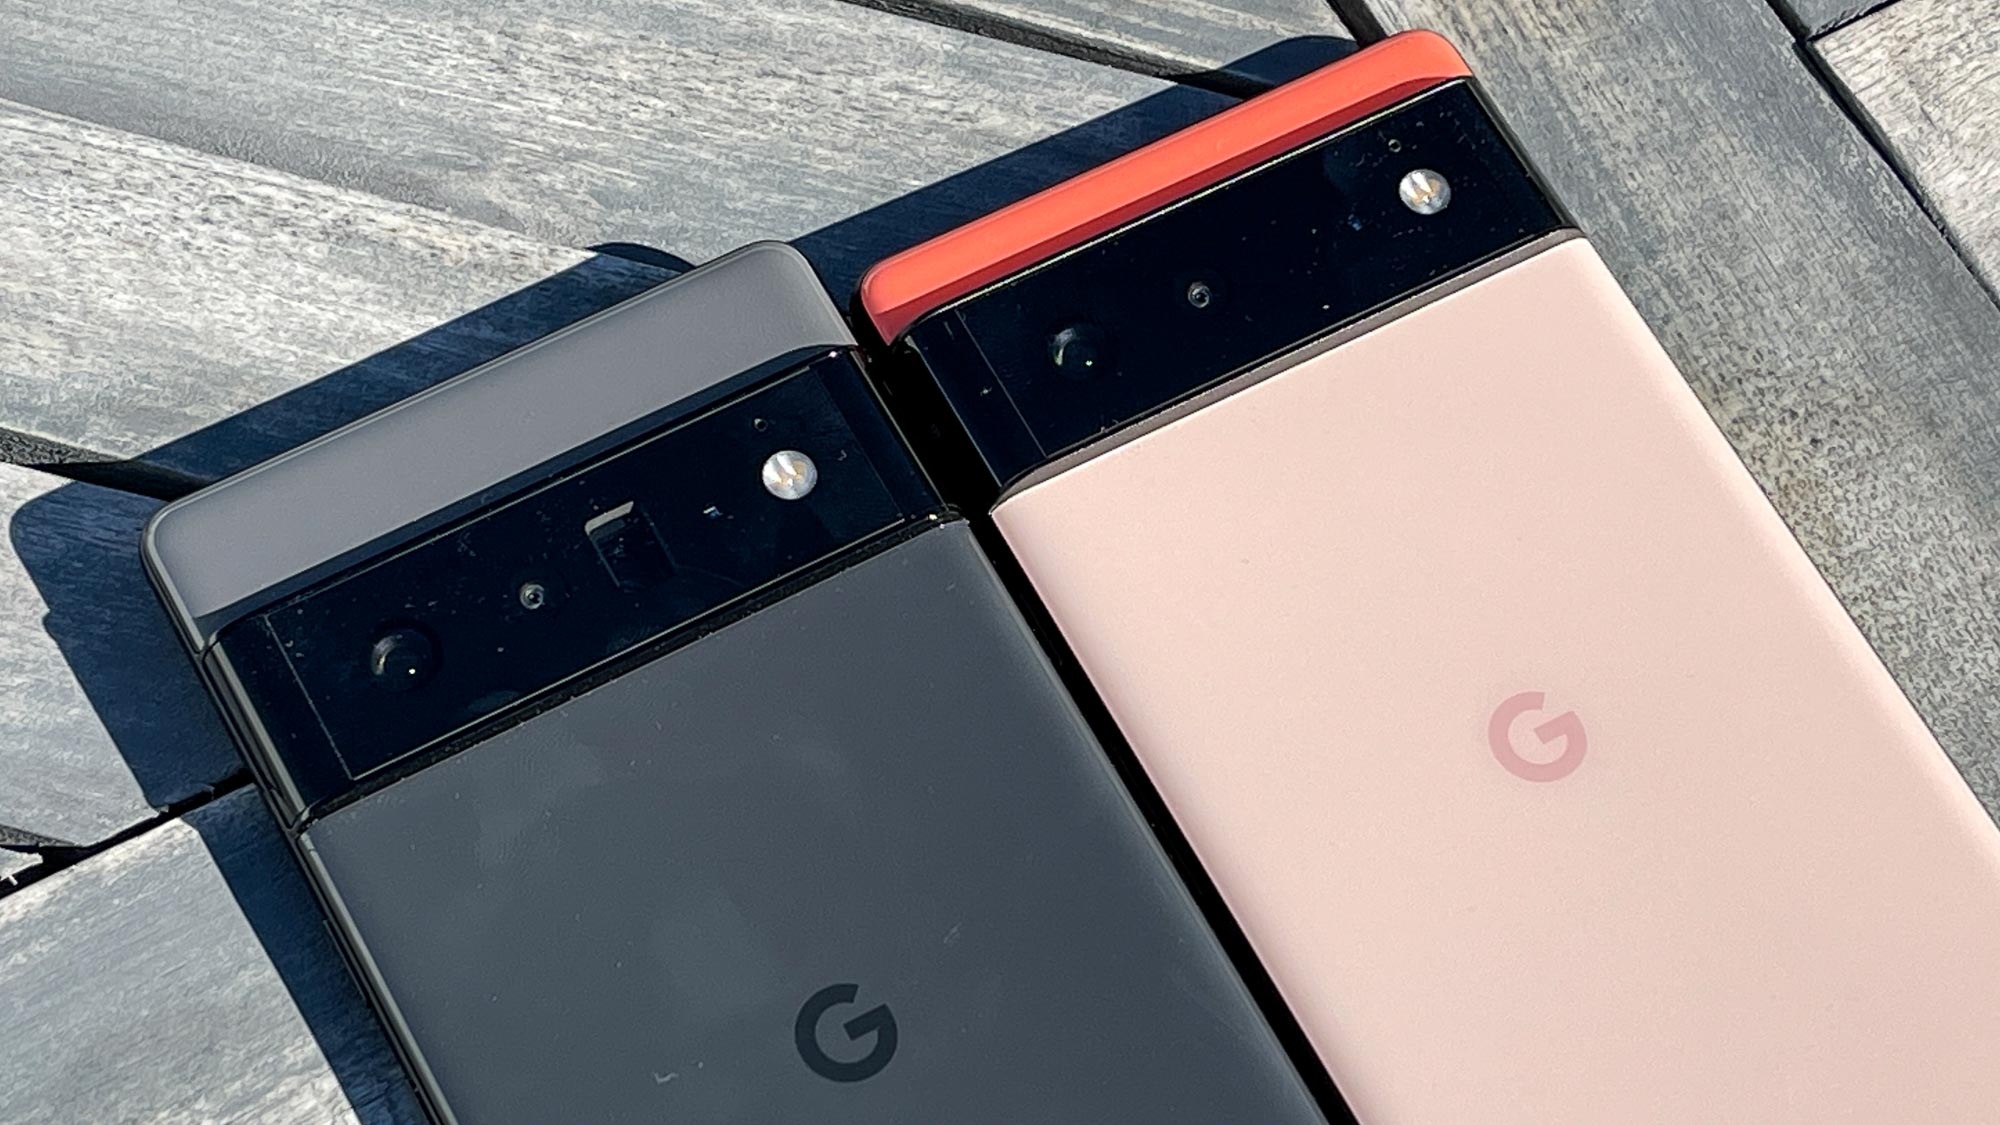 The Google Pixel 6 Pro (in black) and Google Pixel 6 (in coral) laid next to each other on wooden decking